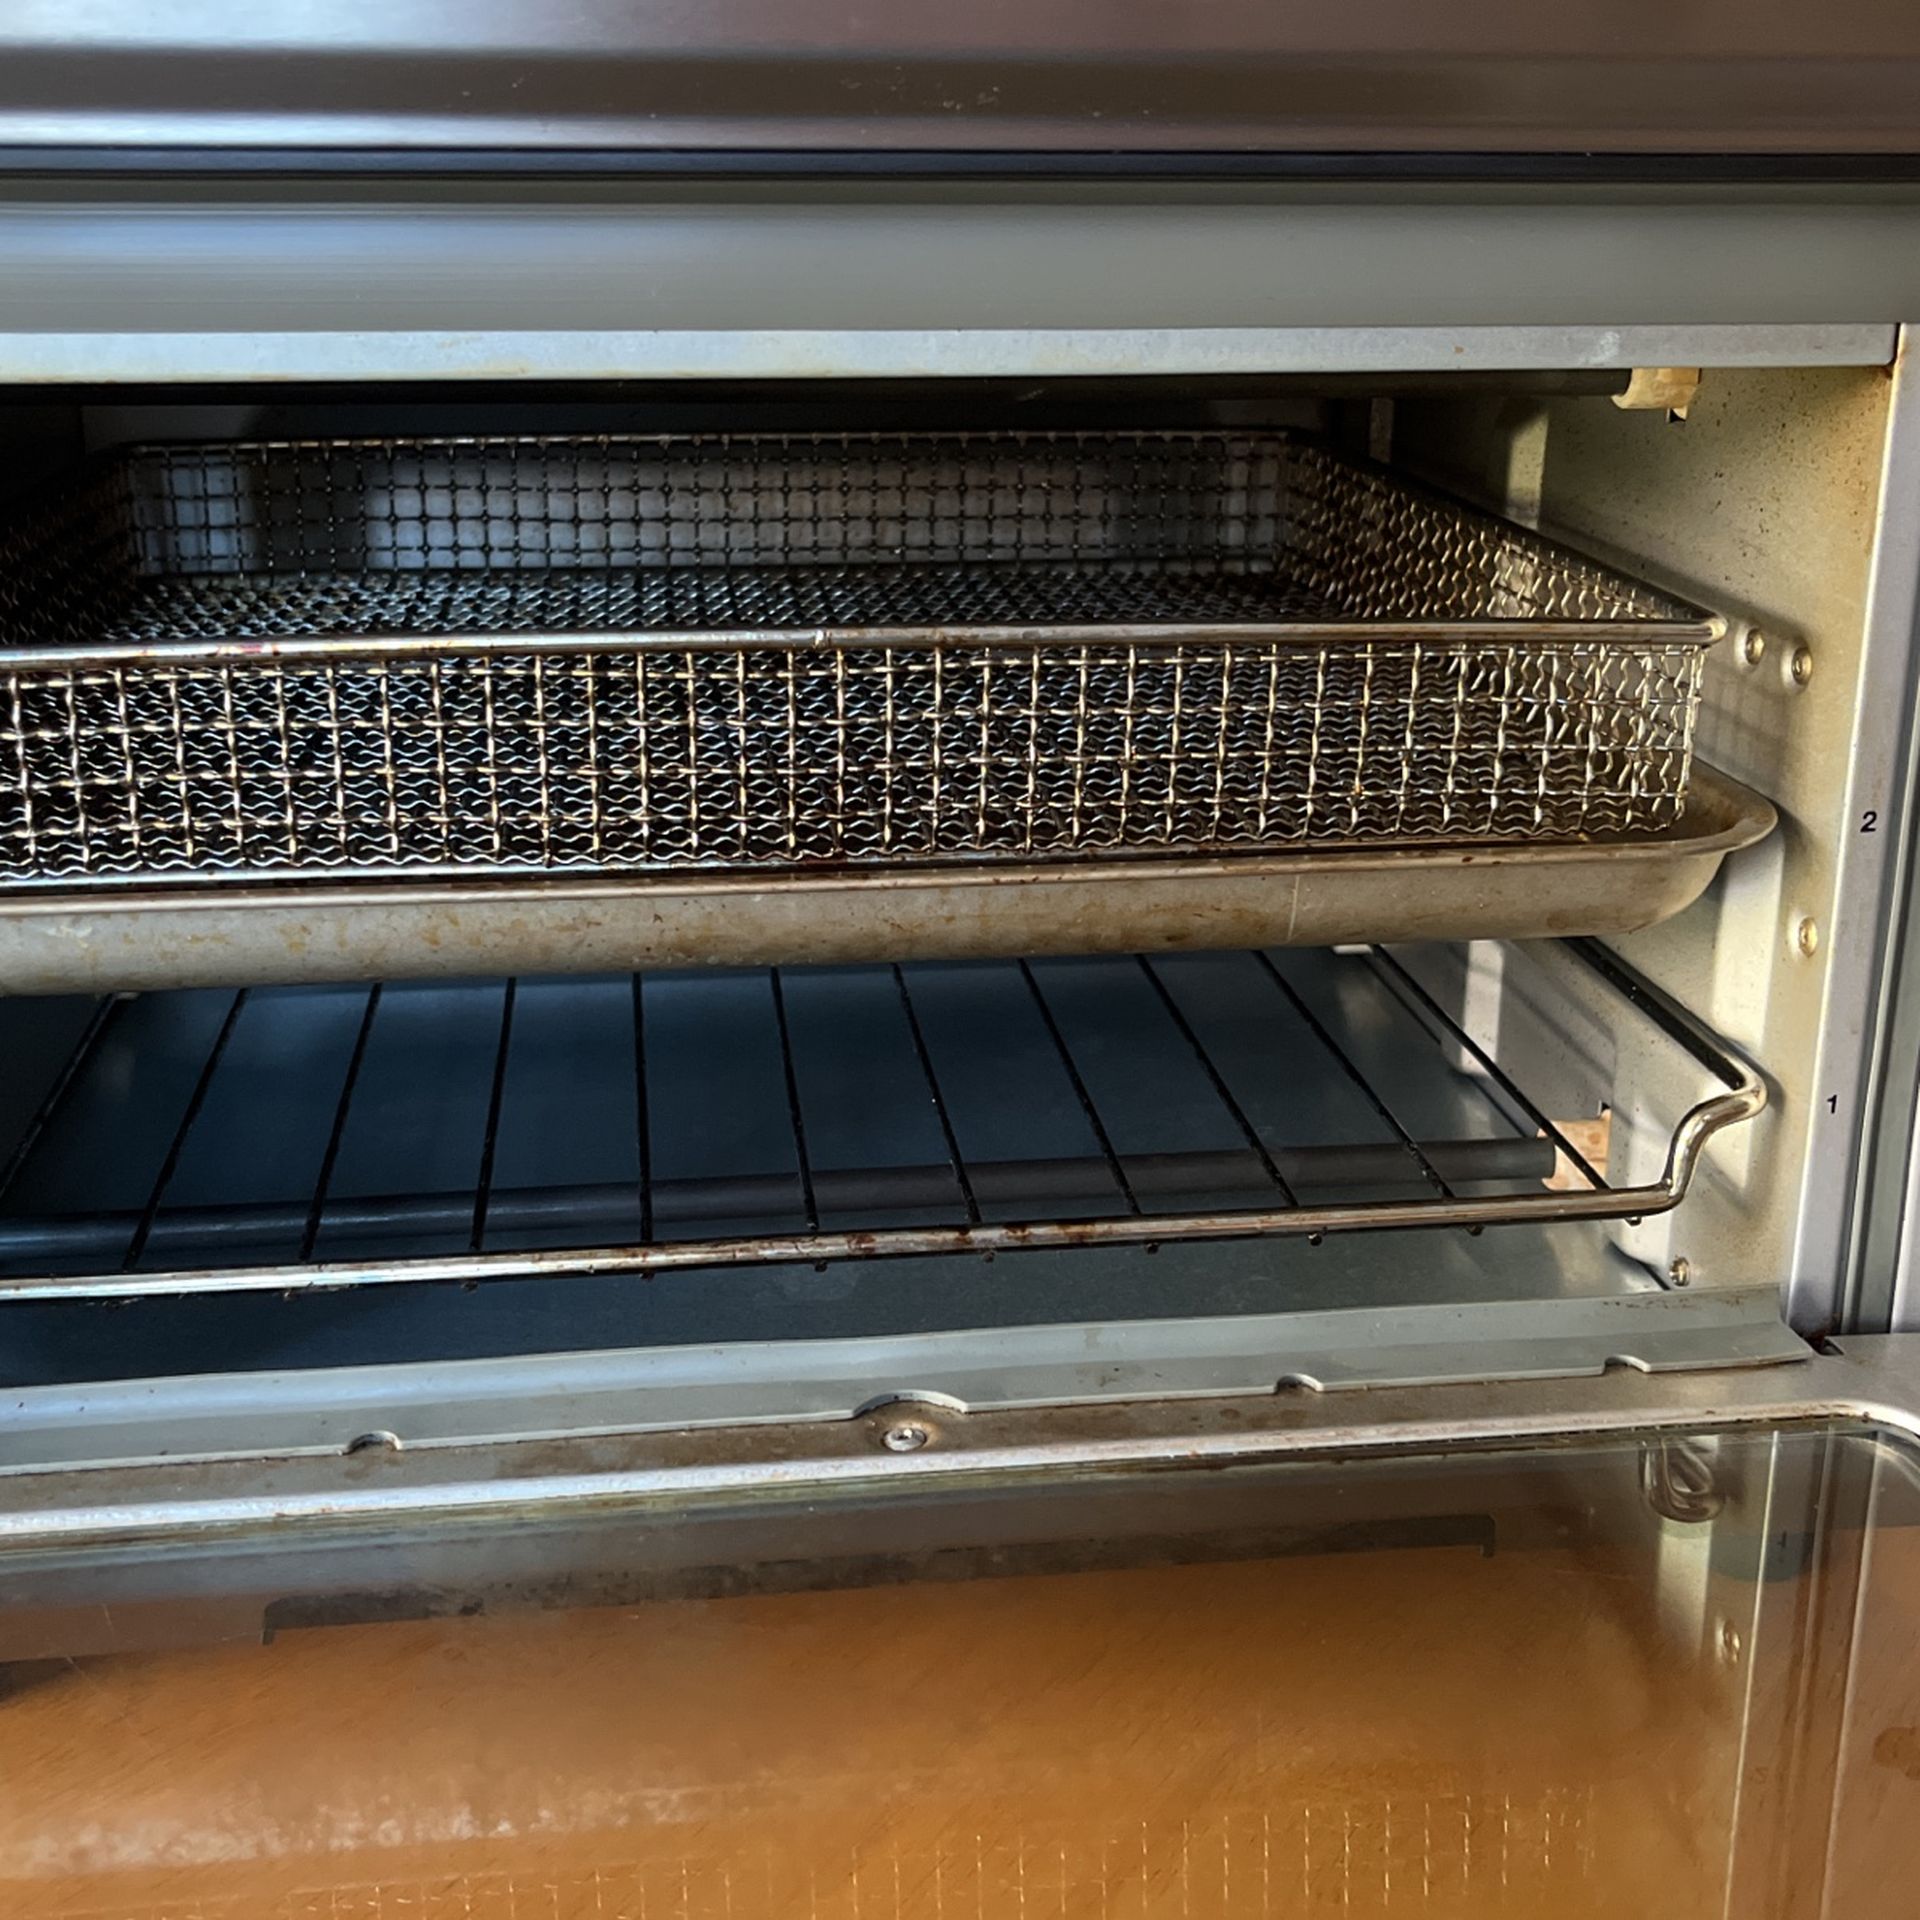 Cuisinart CTOA-122 Convection Toaster Oven Airfryer, for Sale in Issaquah,  WA - OfferUp